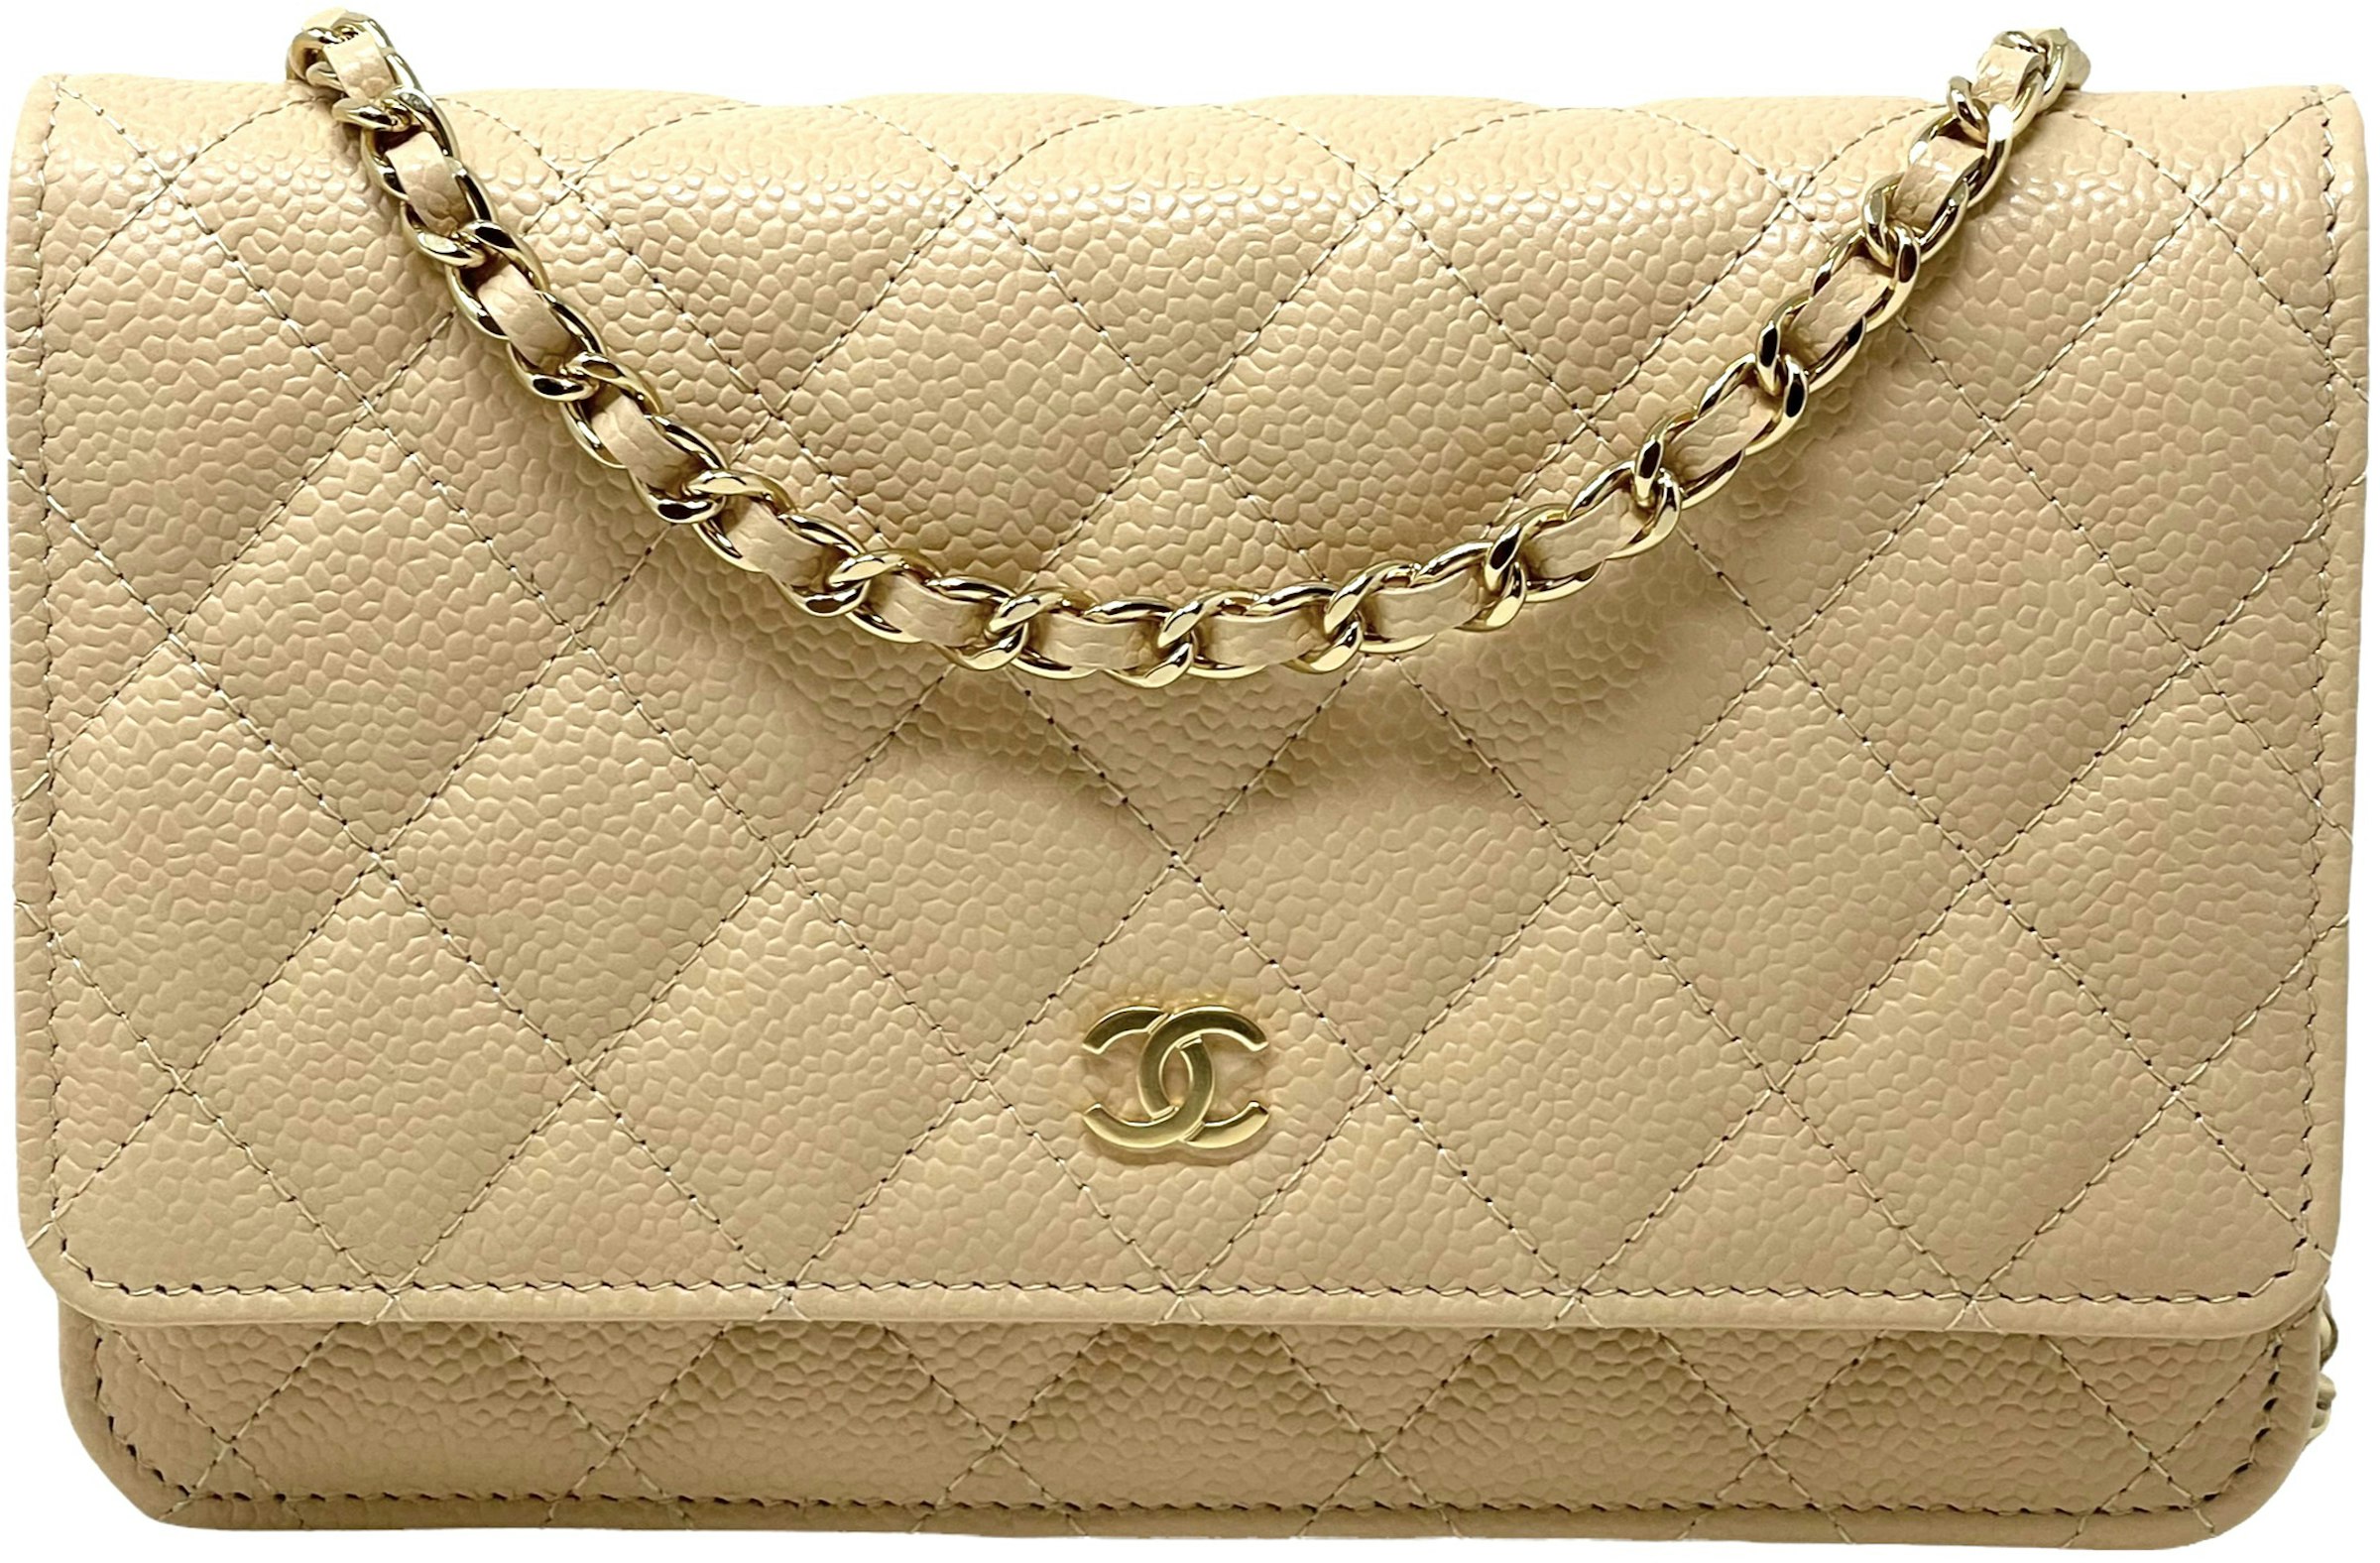 Classic Quilted Caviar WOC Wallet Crossbody Bag Beige in with Gold-tone - US